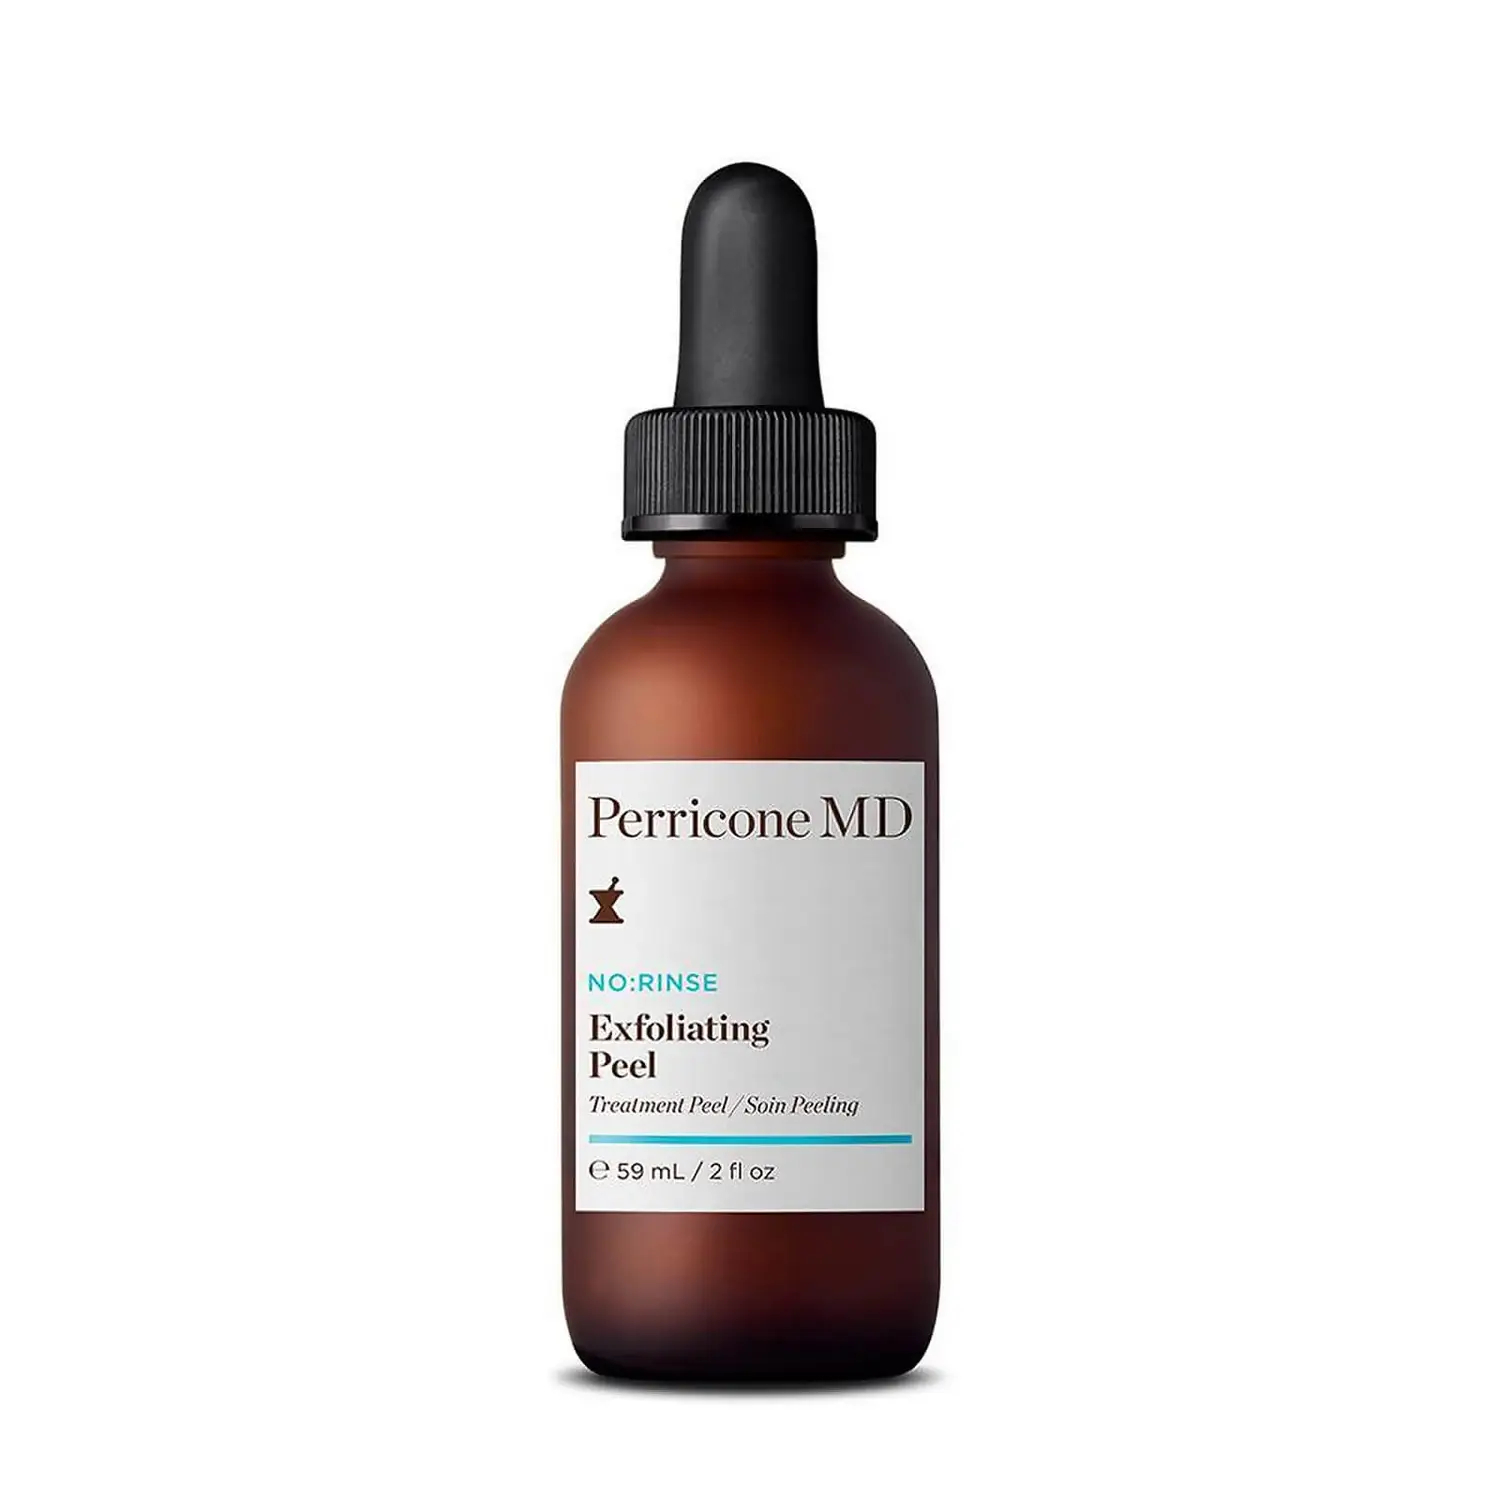 Image of No:Rinse Exfoliating Peel Perricone MD 59ml